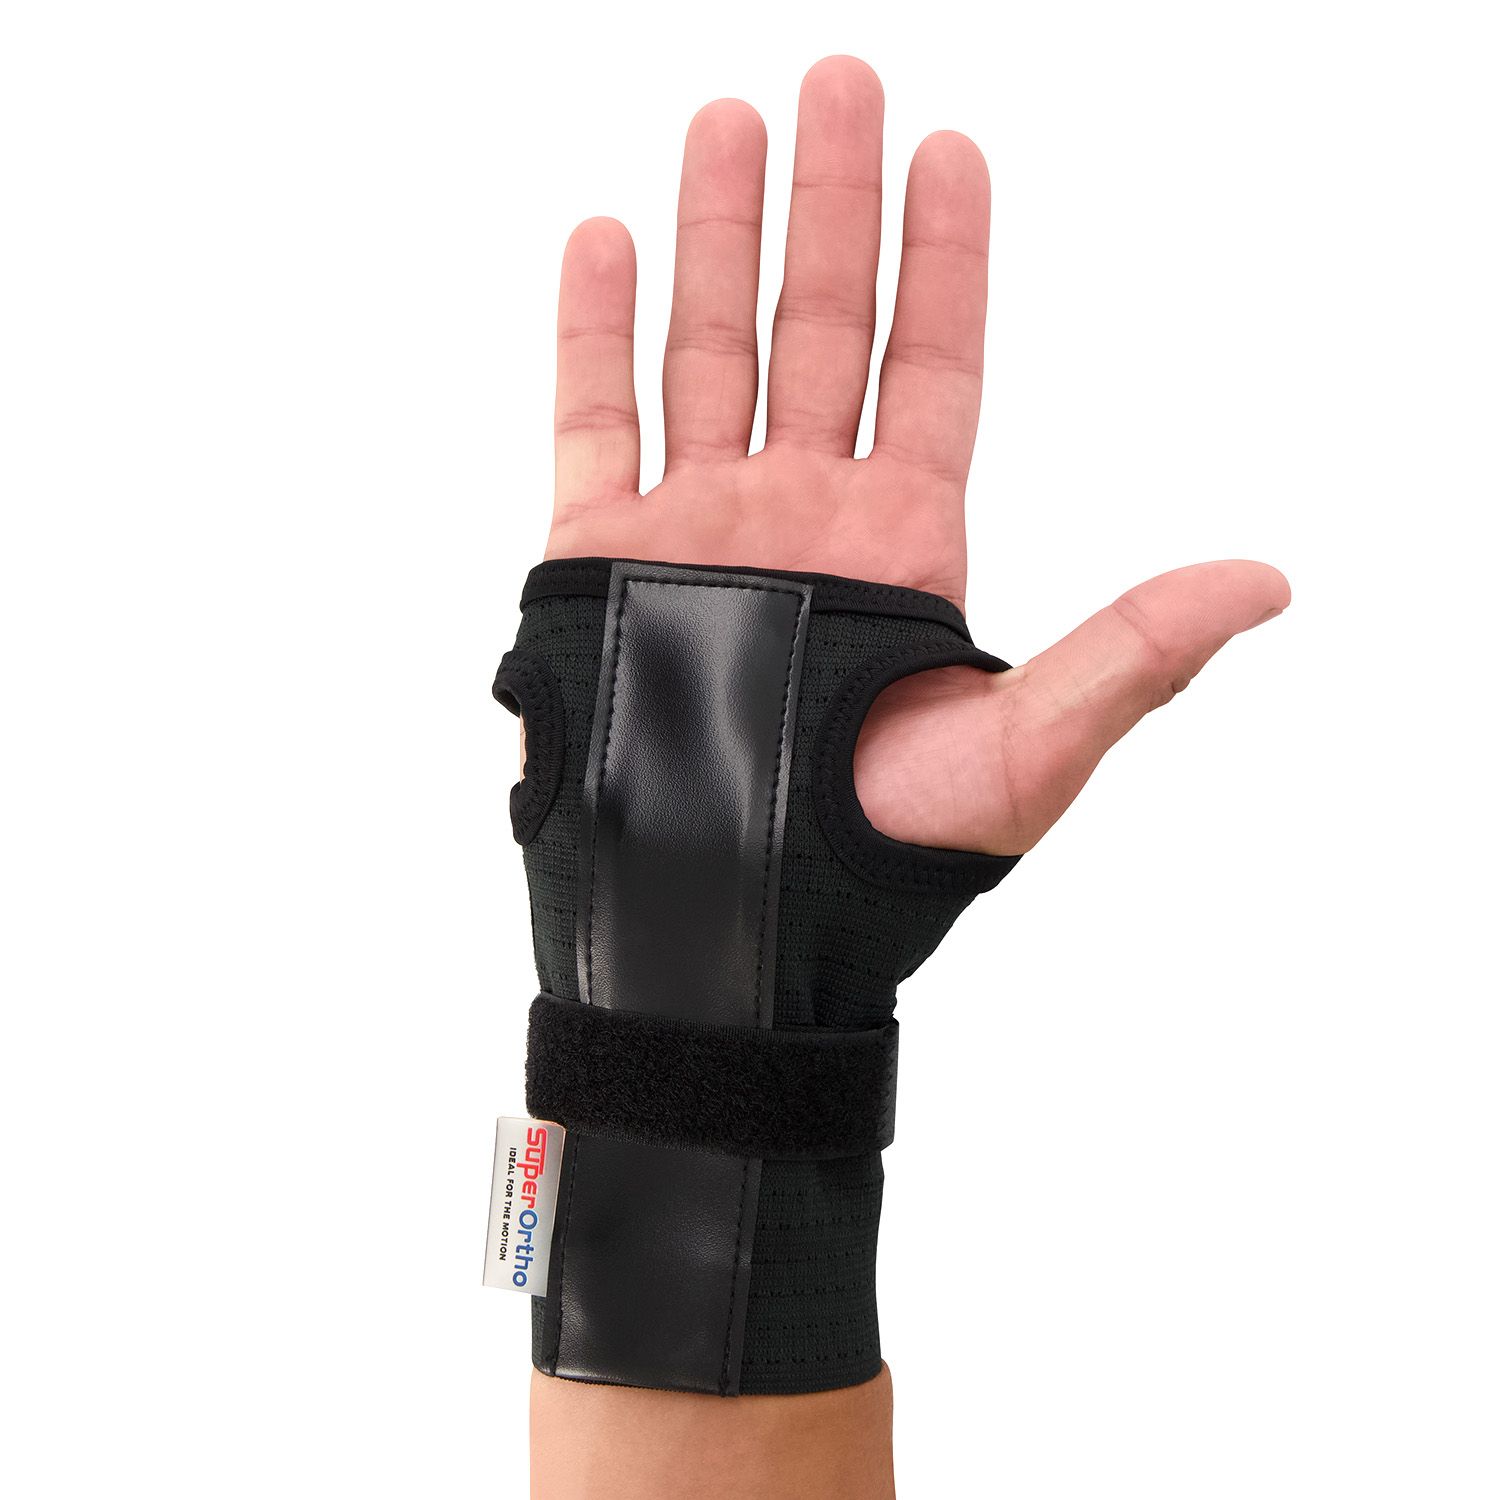 super ortho - carpal tunnel syndrome wrist support hand opened